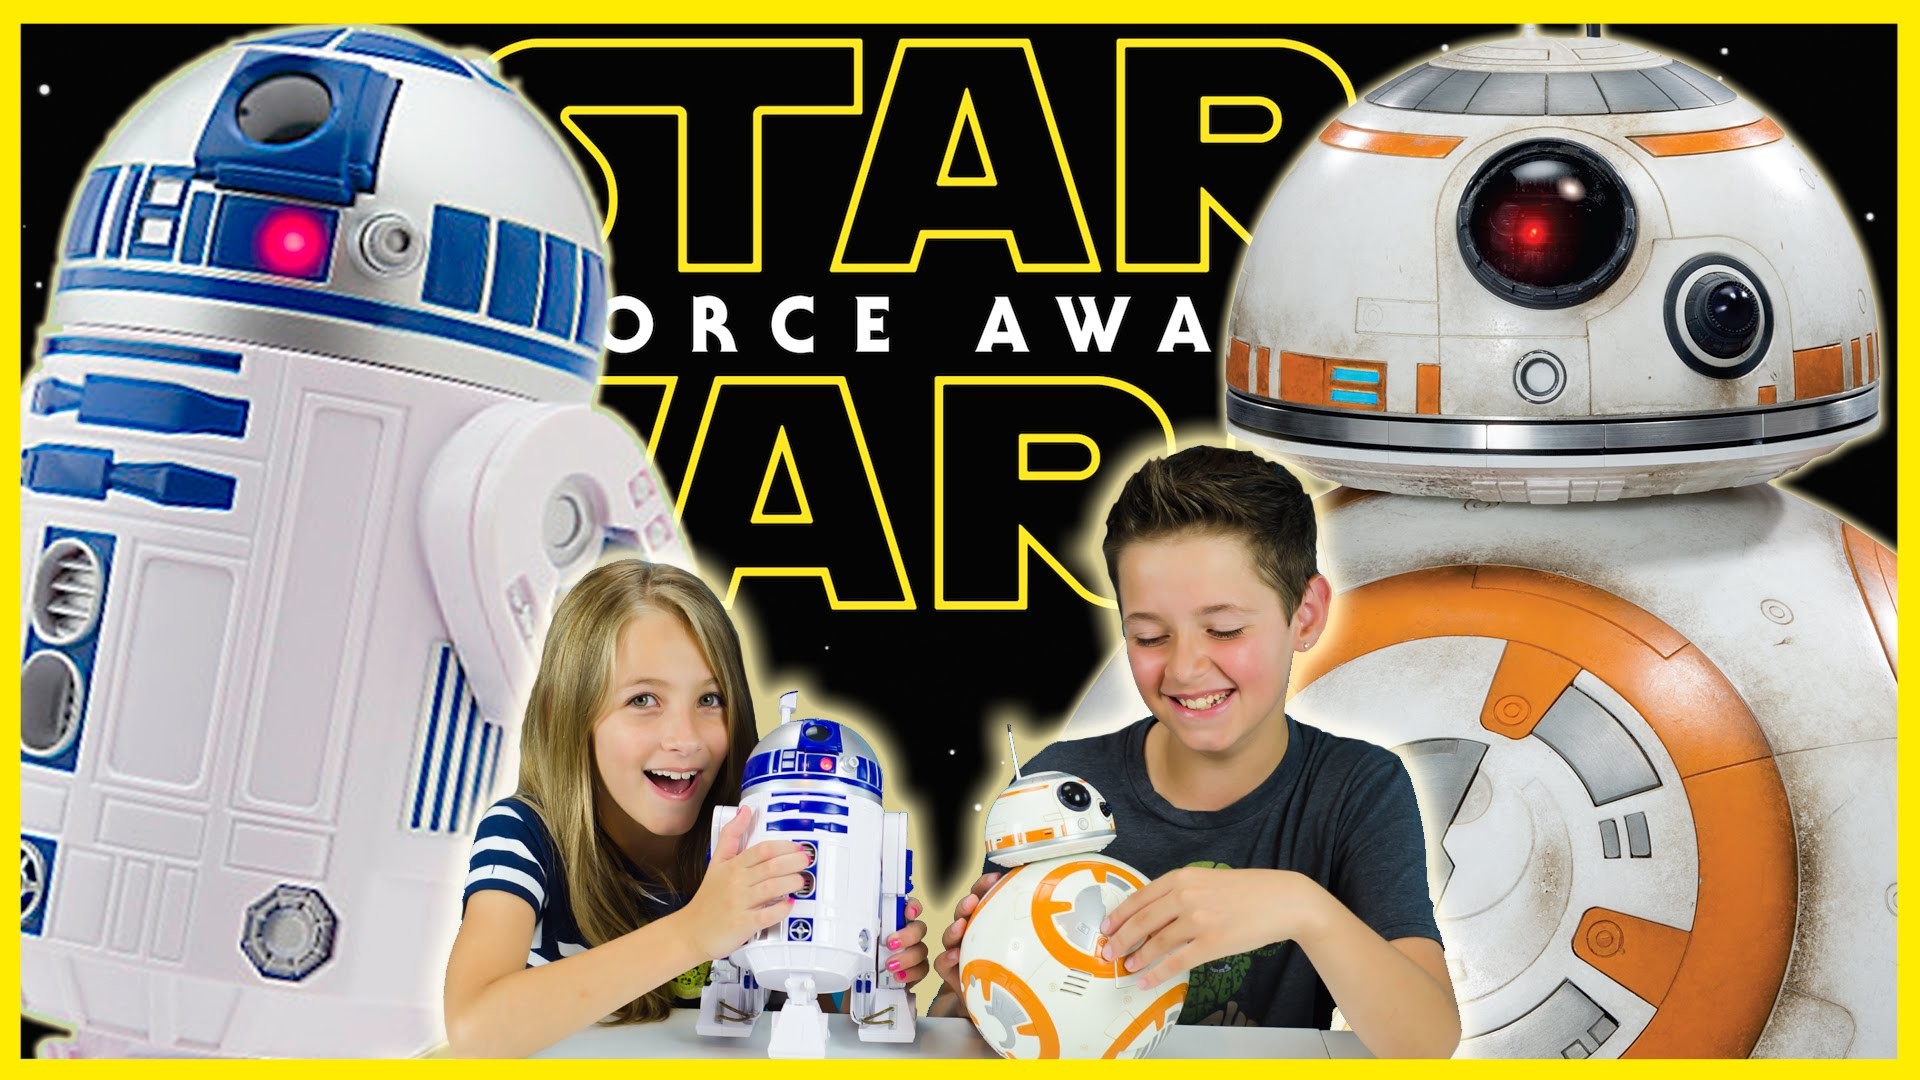 1920x1080 *NEW* STAR WARS 7 BB-8 and R2-D2 WALKING TALKING DROIDS DISNEY TOYS REVIEW!  THE FORCE AWAKENS PLP TV - YouTube